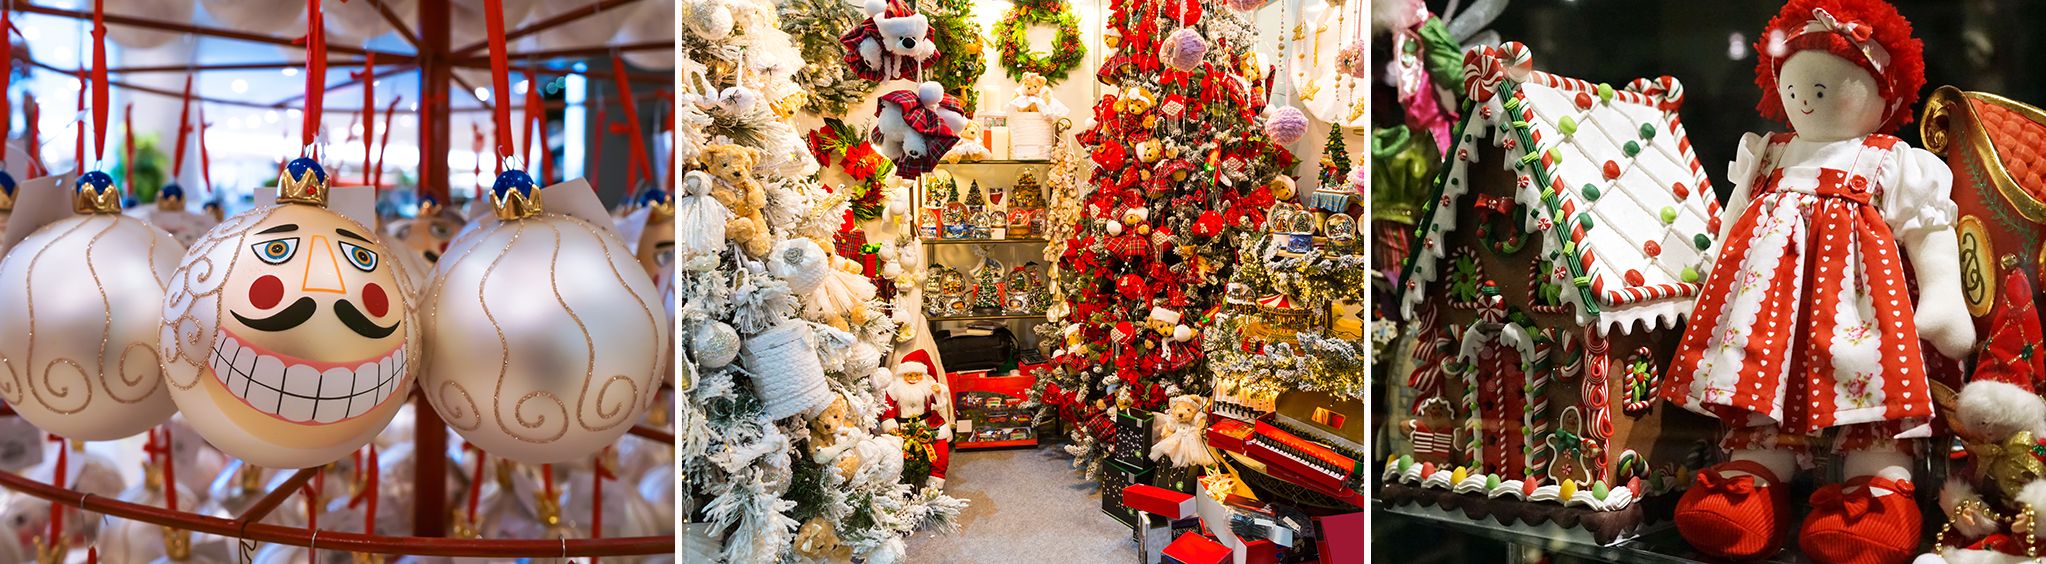 Christmas and Collectibles in Pigeon Forge, TN